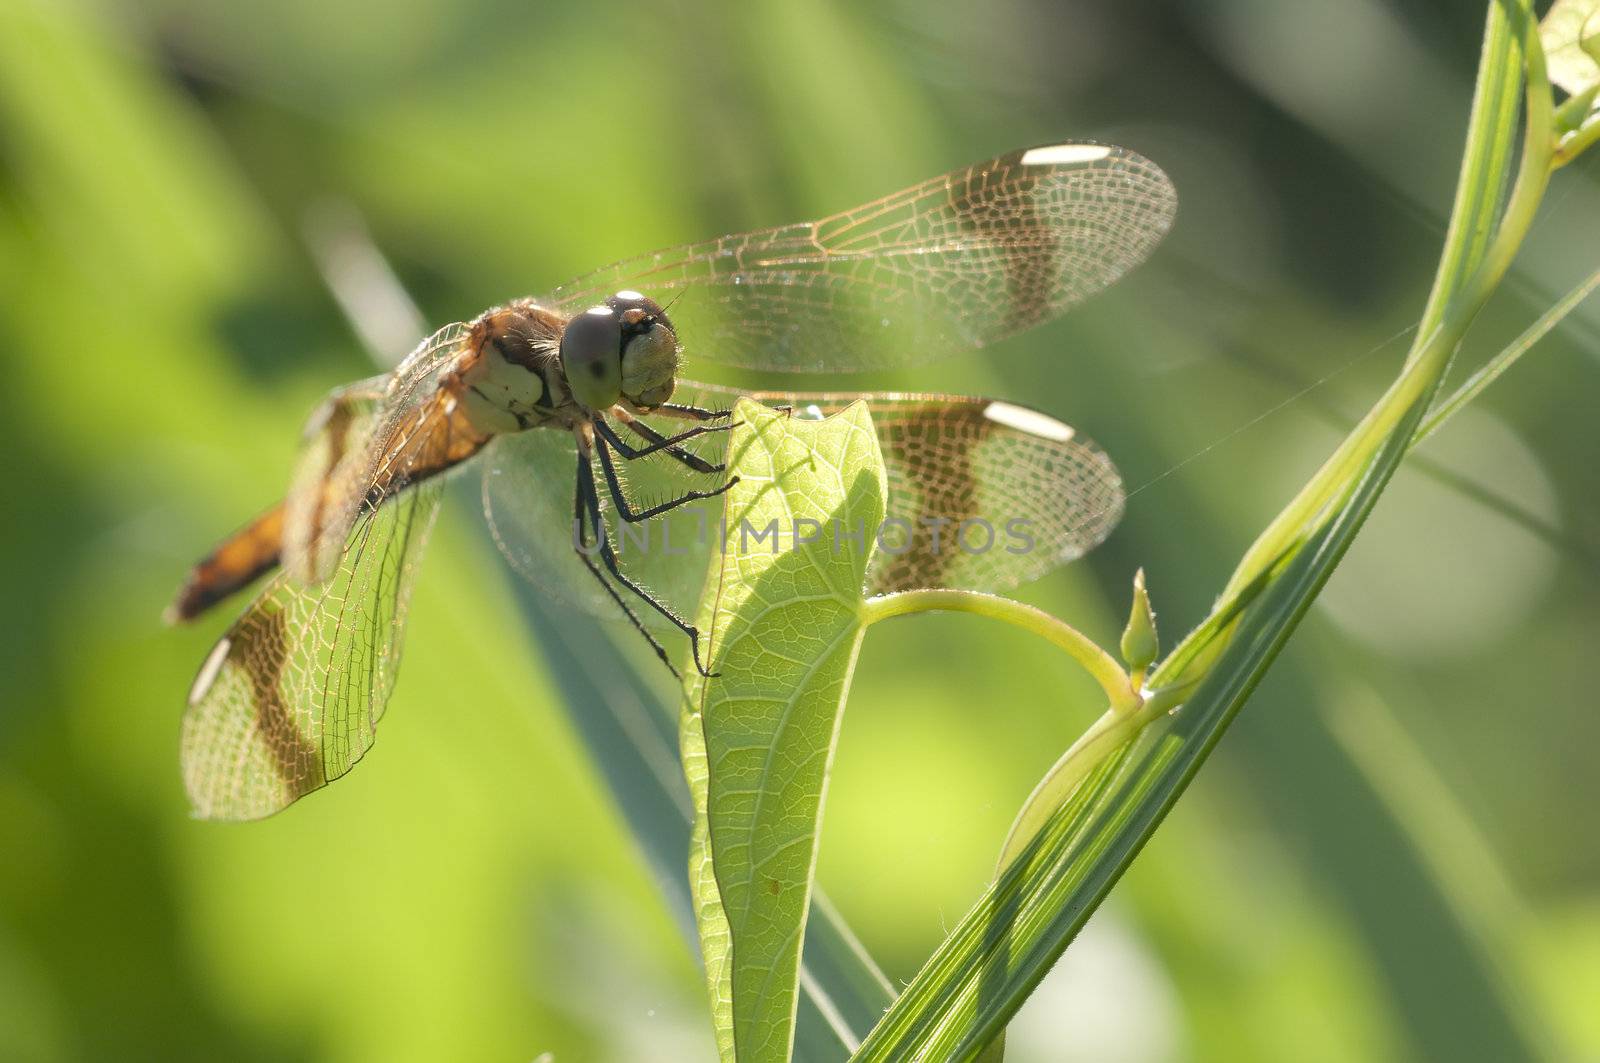 Brown dragonfly perched on a blade of grass